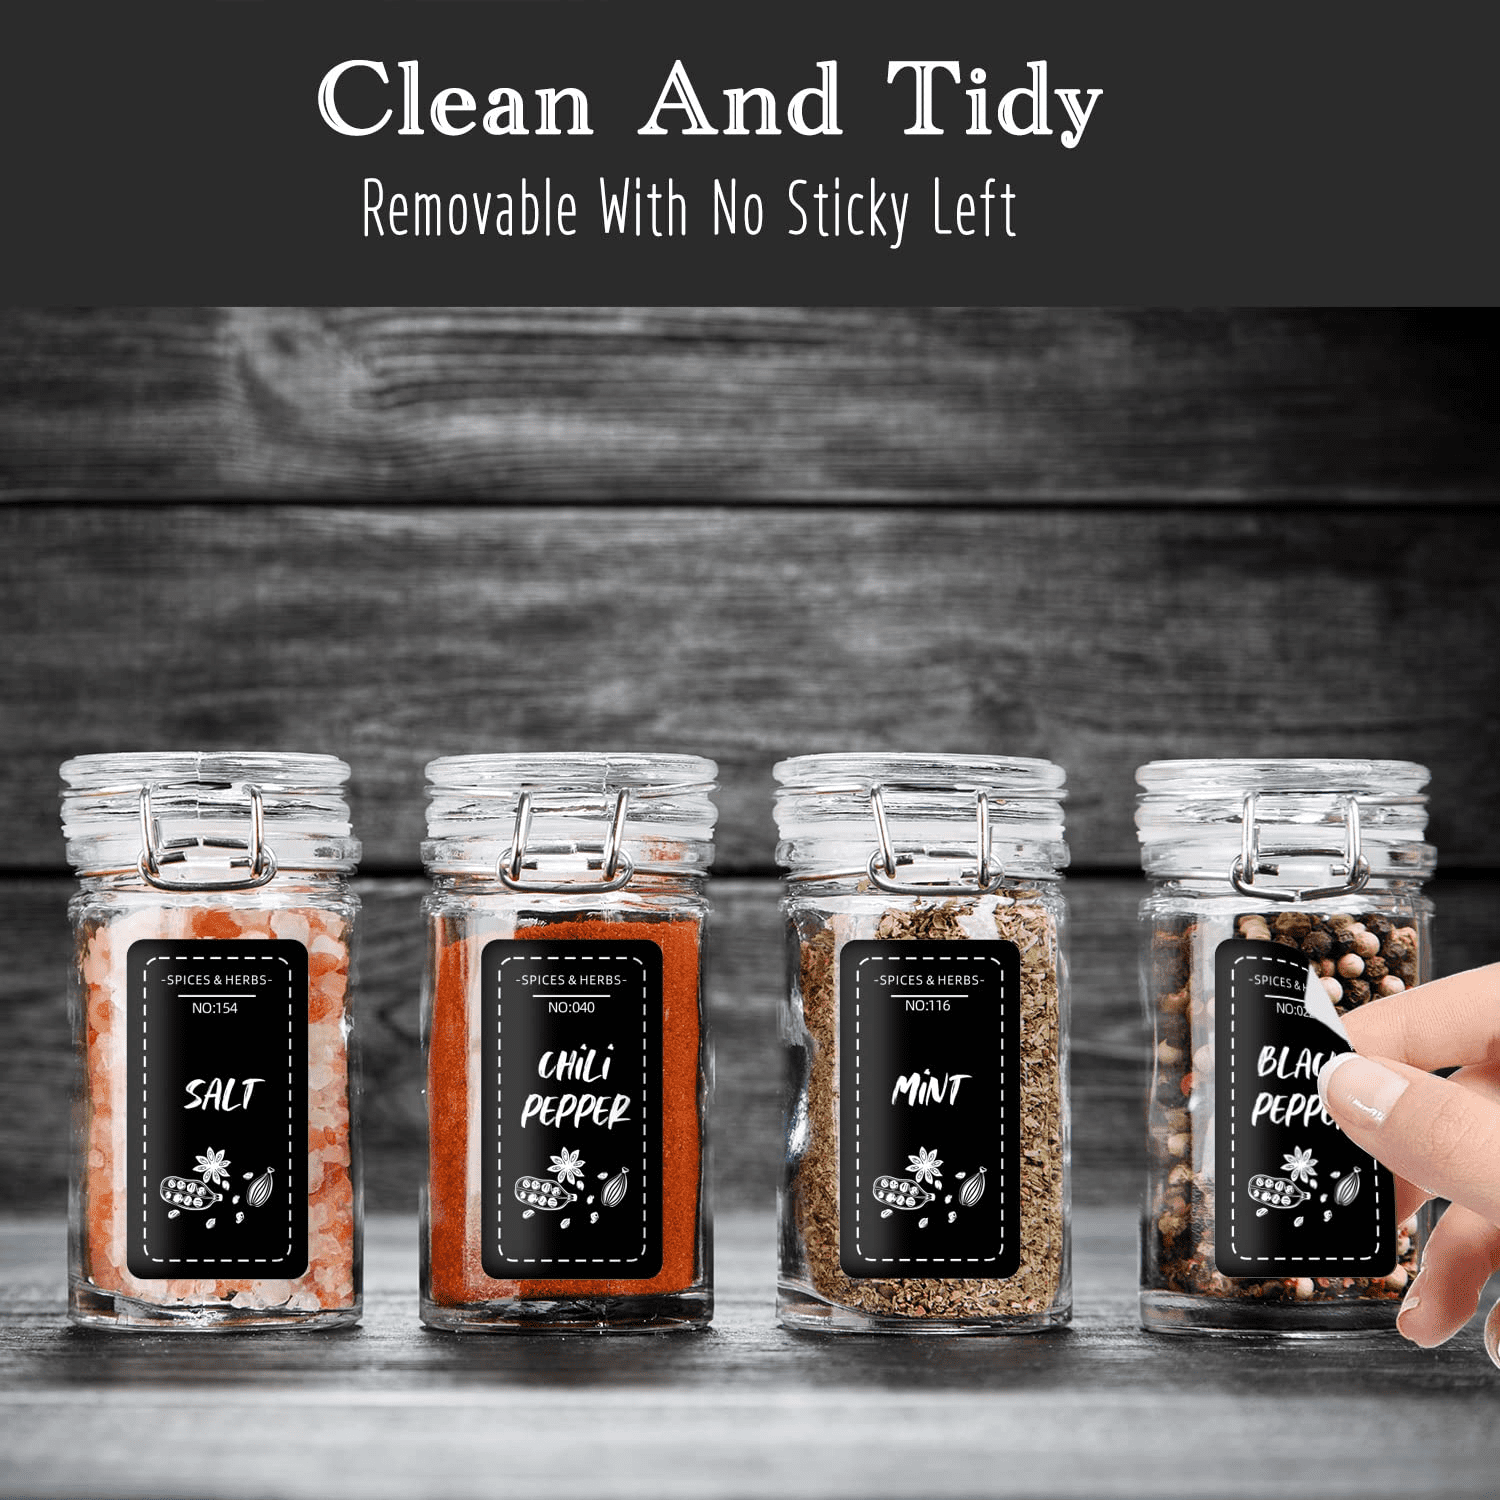 Spice Jar Labels Black Spice Labels Waterproof And Oil proof - Temu